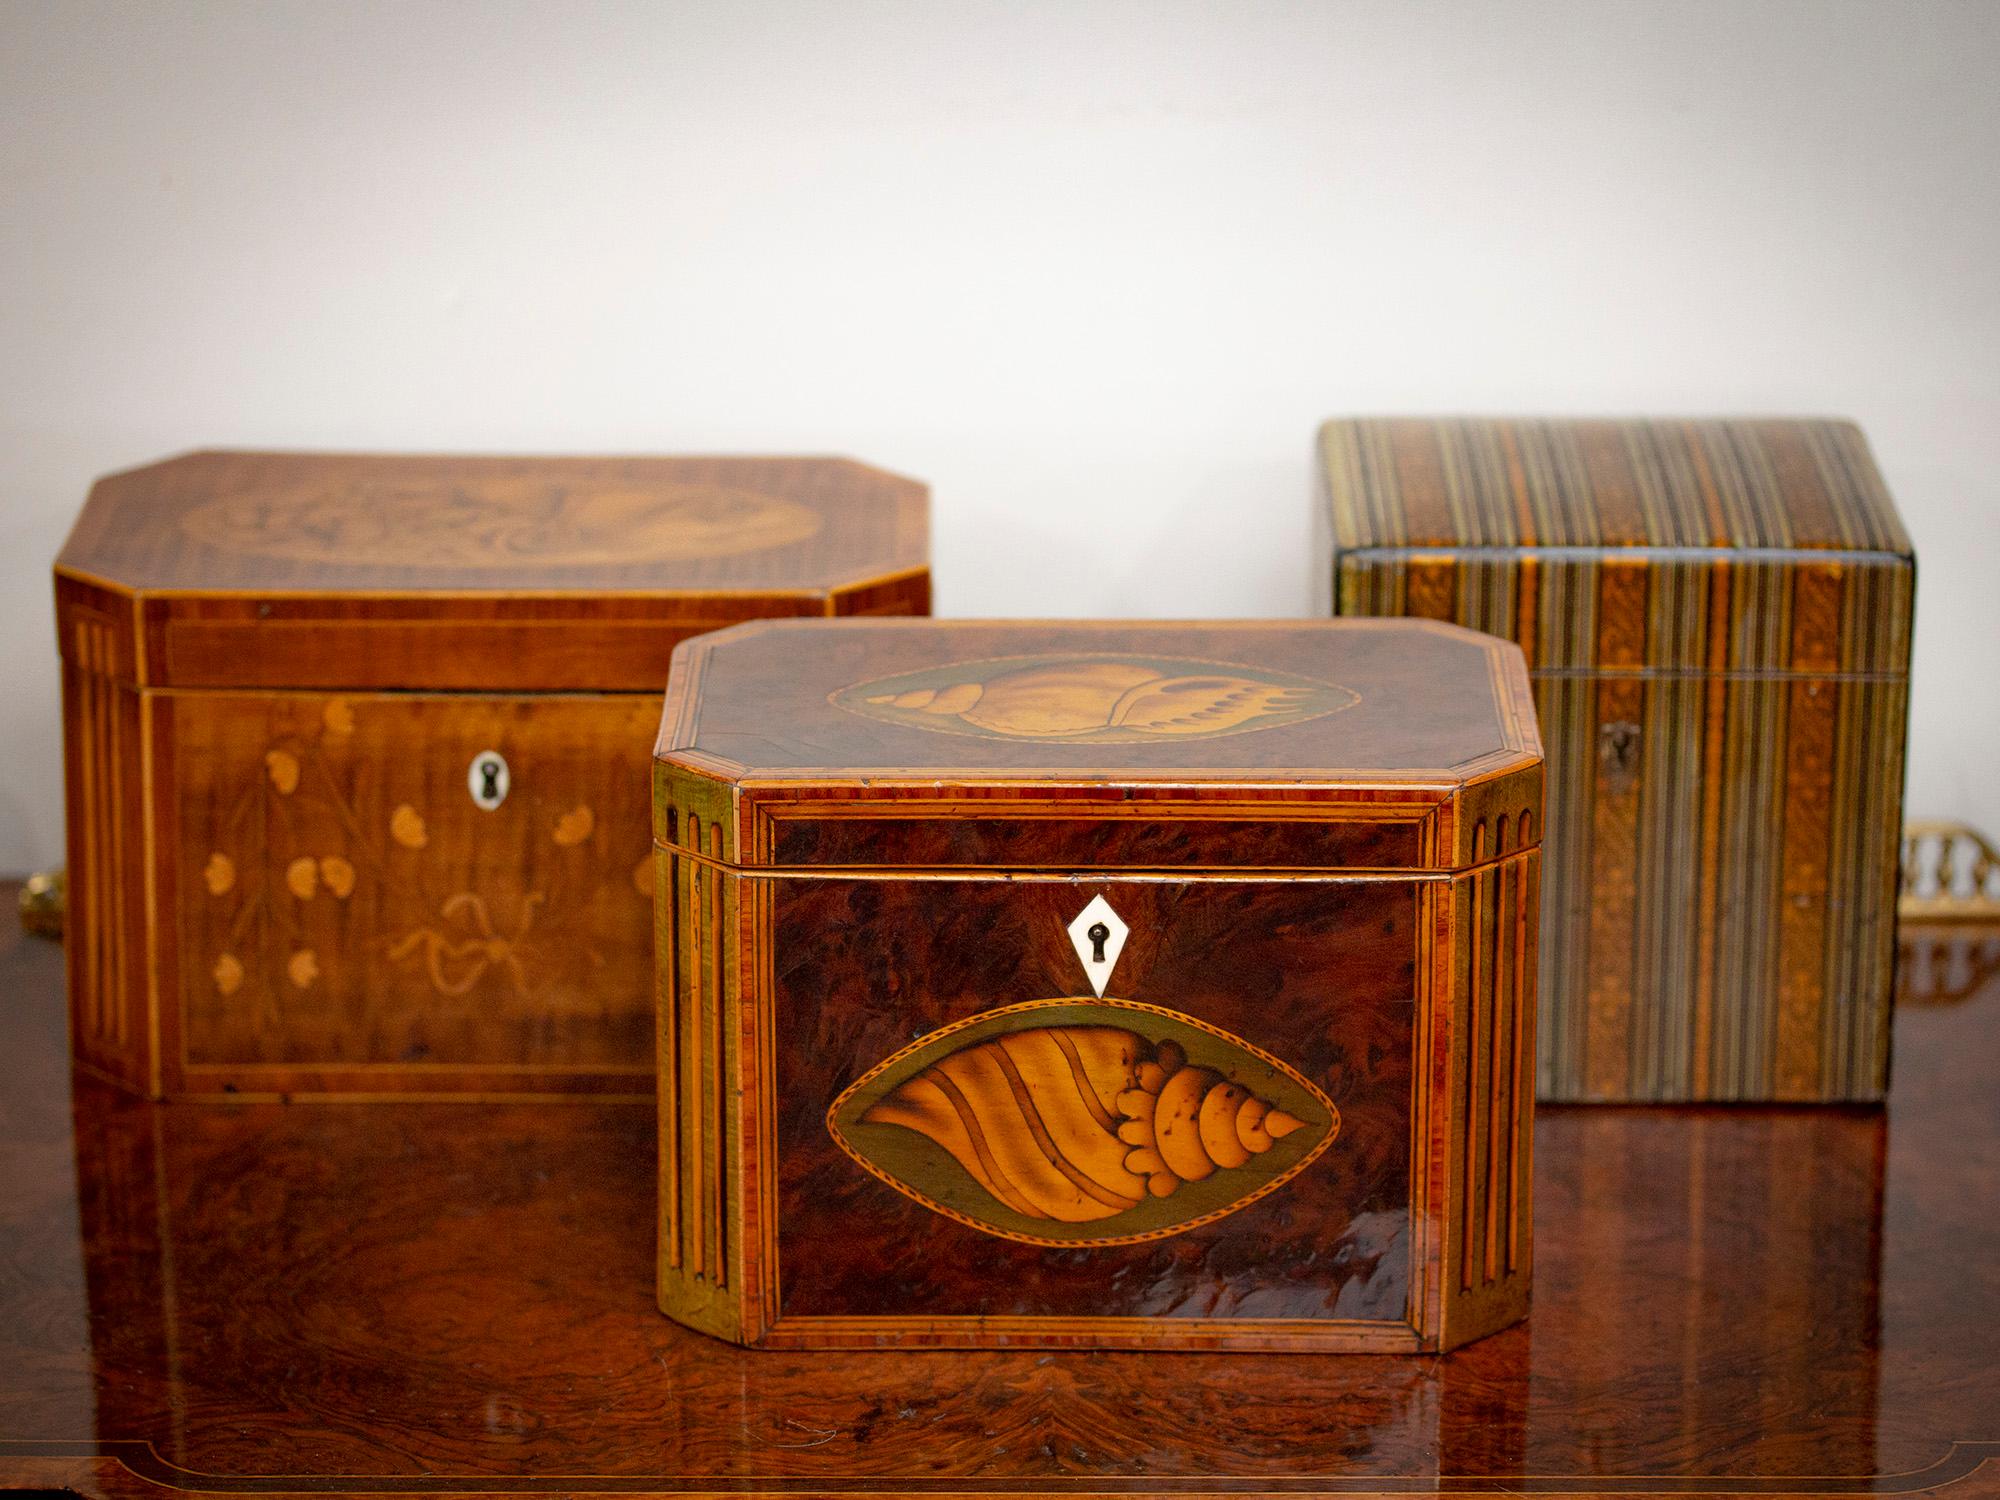 Inlaid with Twin Conch Shells

From our Tea Caddy collection, we are delighted to offer this beautiful antique Georgian Burr Yew wood Tea Caddy. The Tea Caddy of rectangular form with fluted green cants and two central oval inlaid conch shells